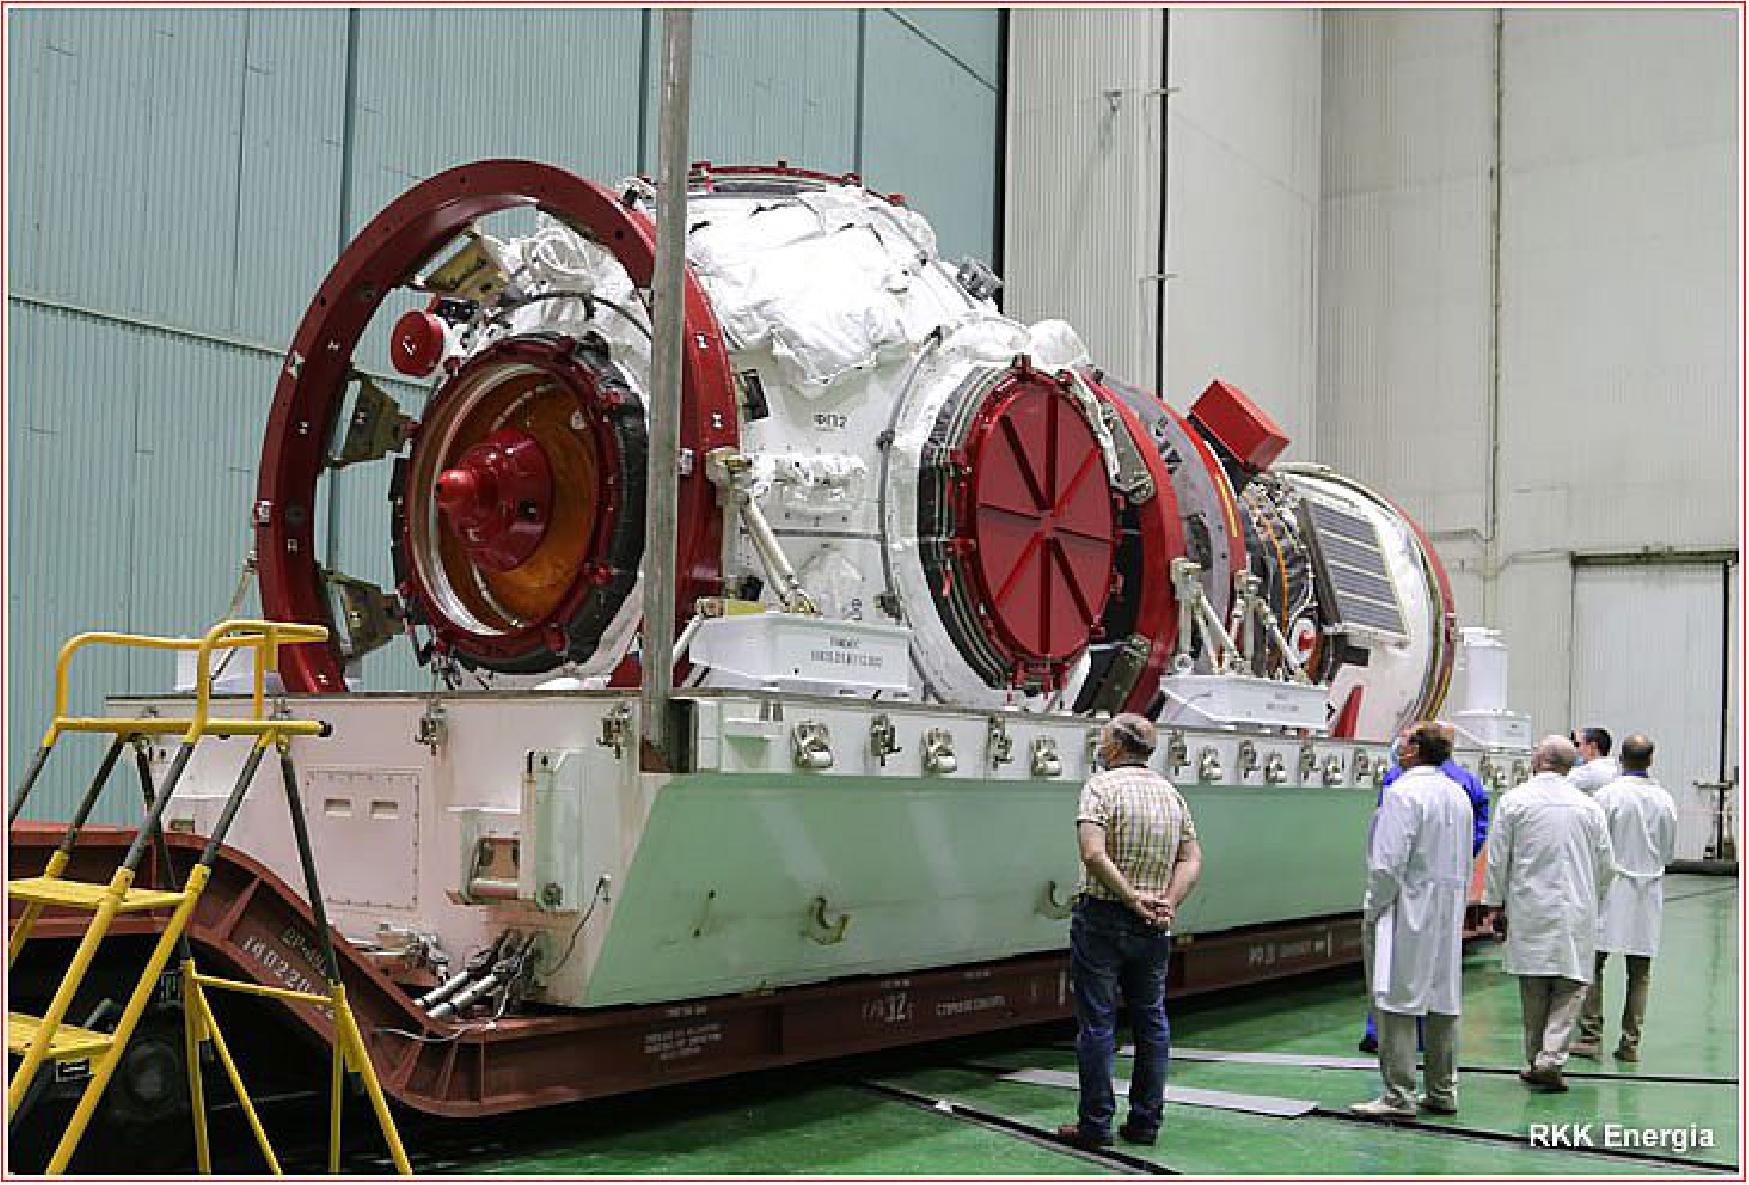 Figure 3: Prichal Node Module, UM, and its Progress space tug are unloaded in Baikonur on August 11, 2021 (image credit: RKK Energia, Anatoly Zak)